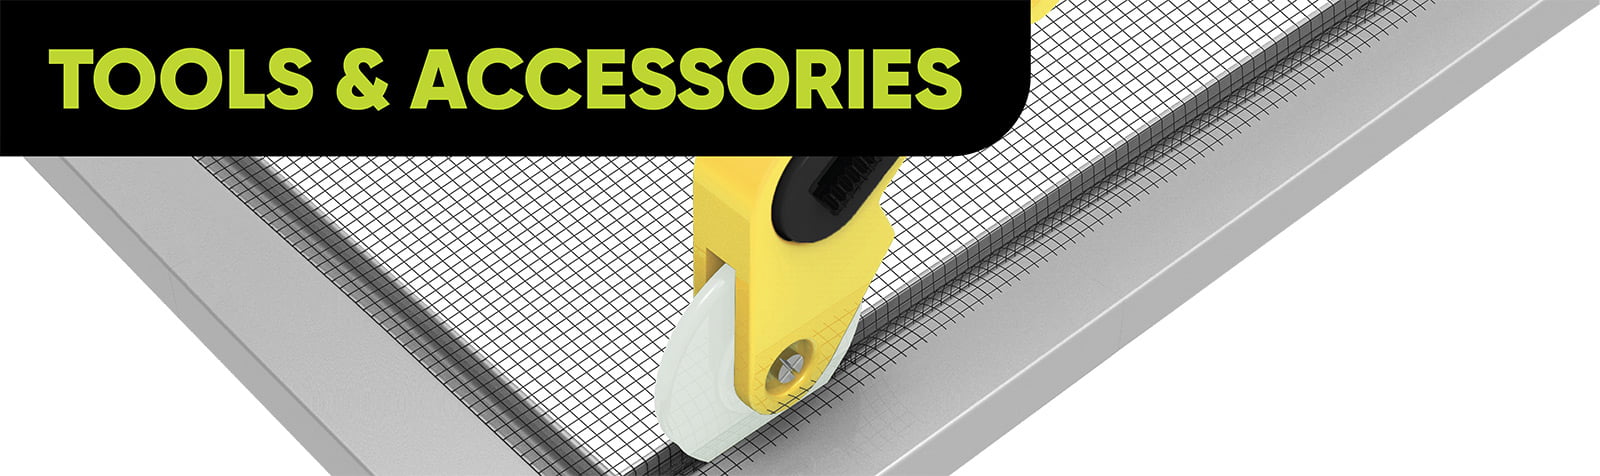 Flyscreen Tools Accessories Category Banner